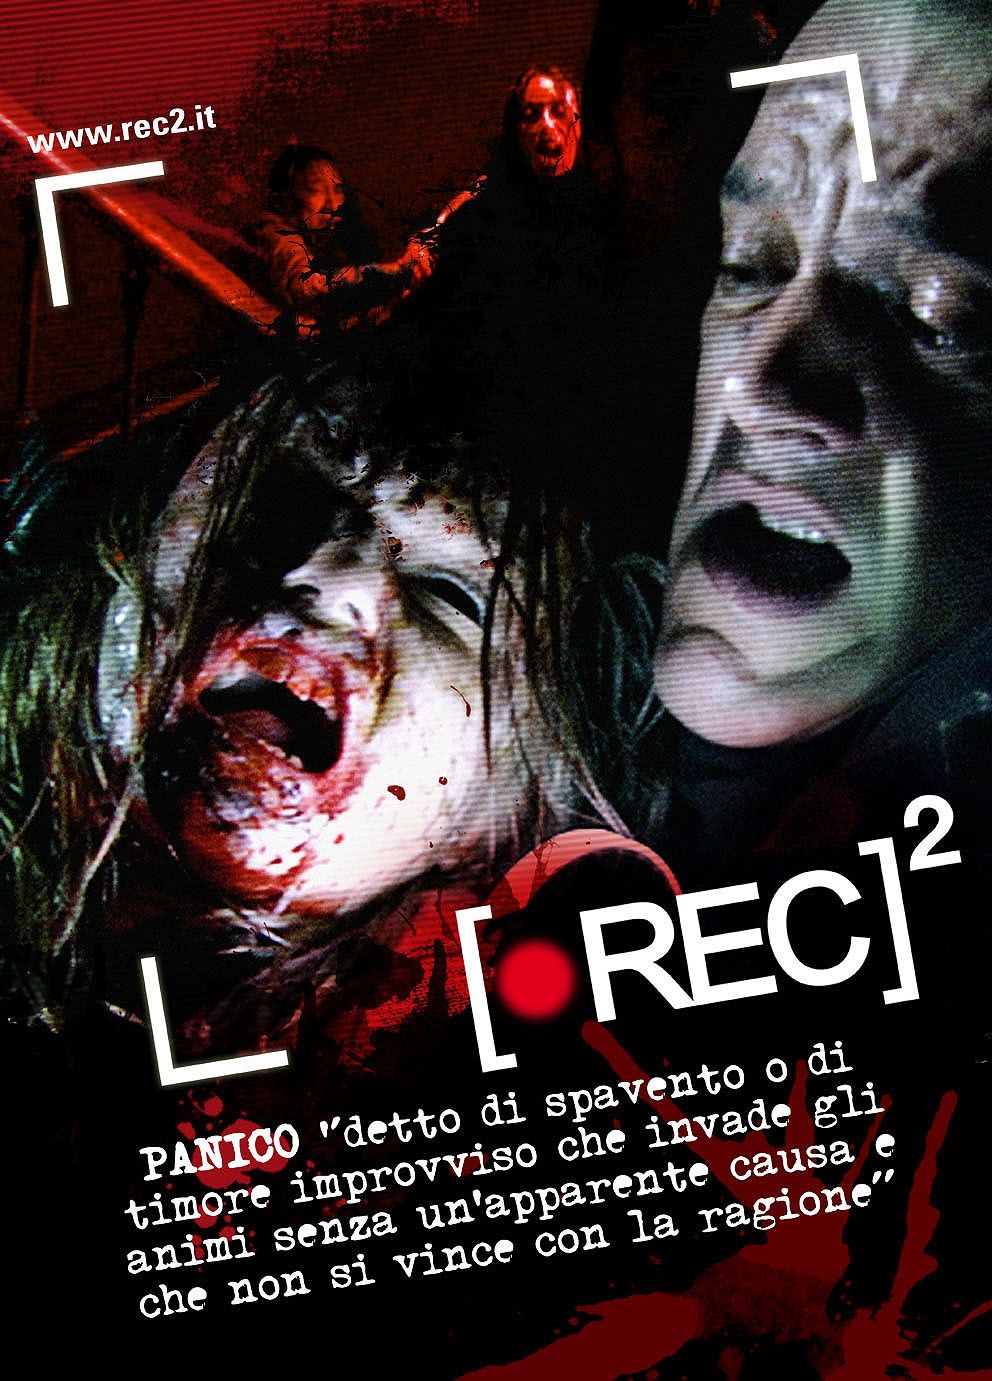 Extra Large Movie Poster Image for [Rec] 2 (#5 of 7)